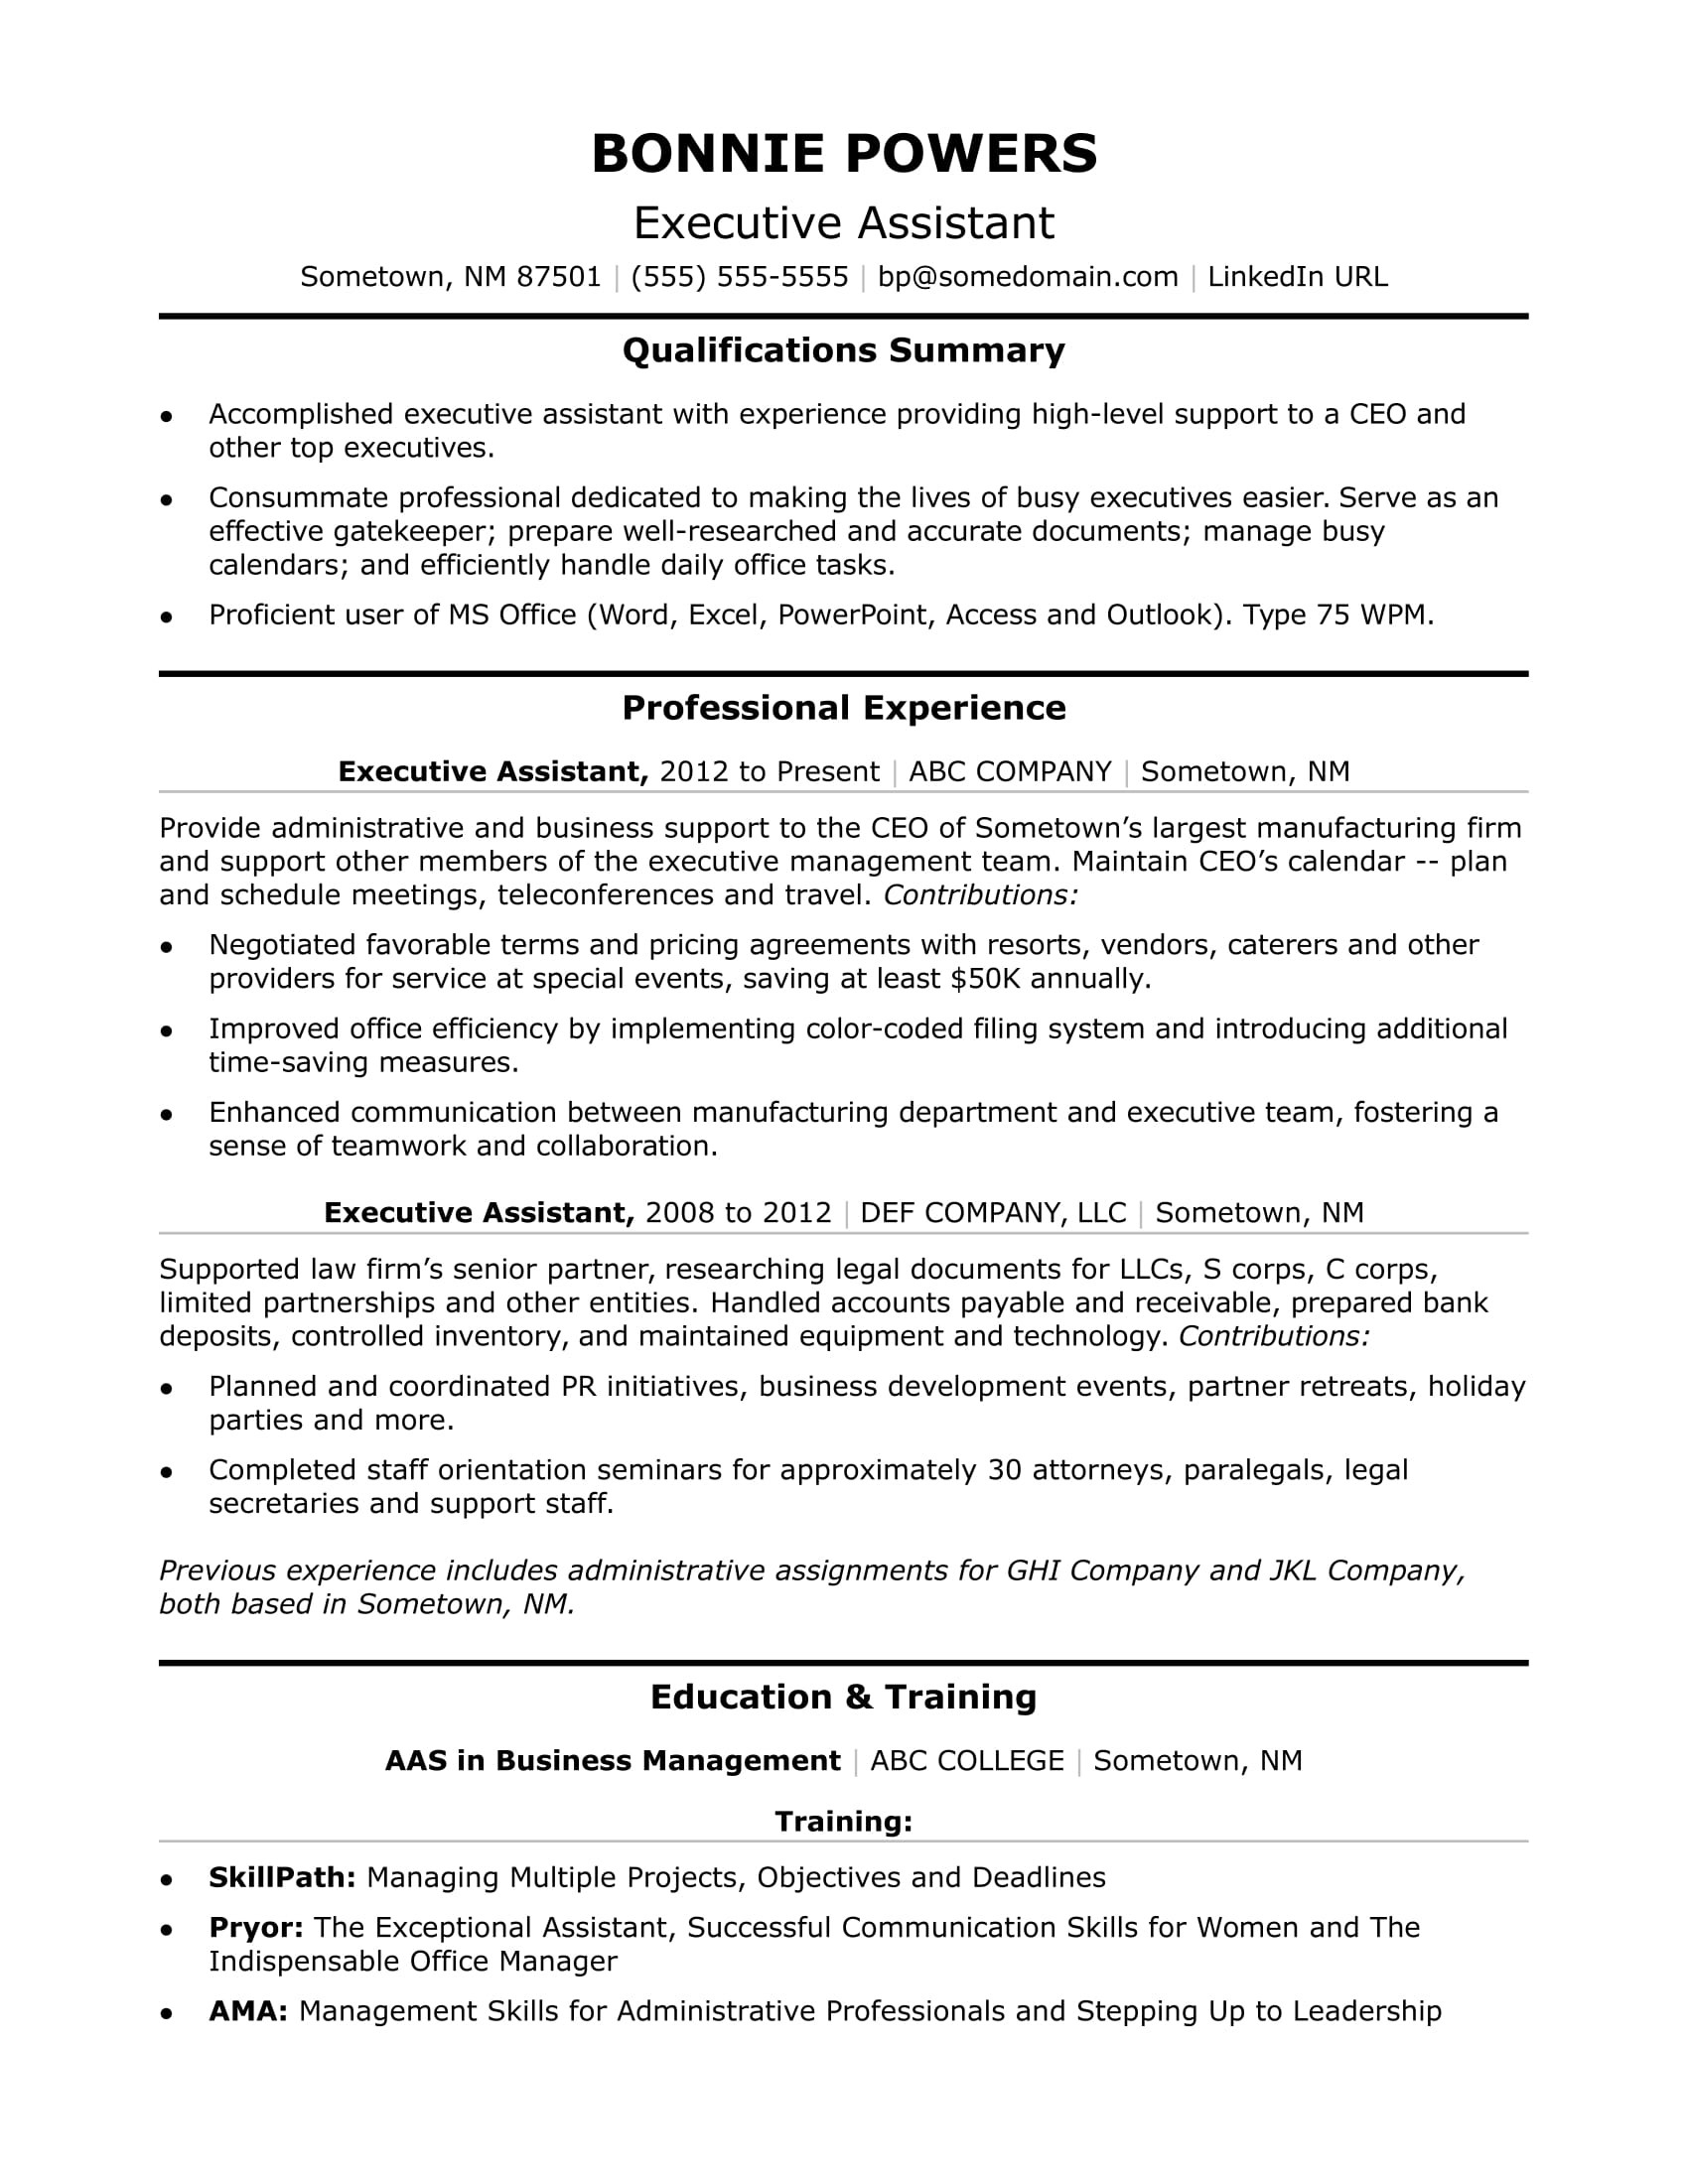 Sample Resume for Executive assistant to Md Executive assistant Resume Monster.com